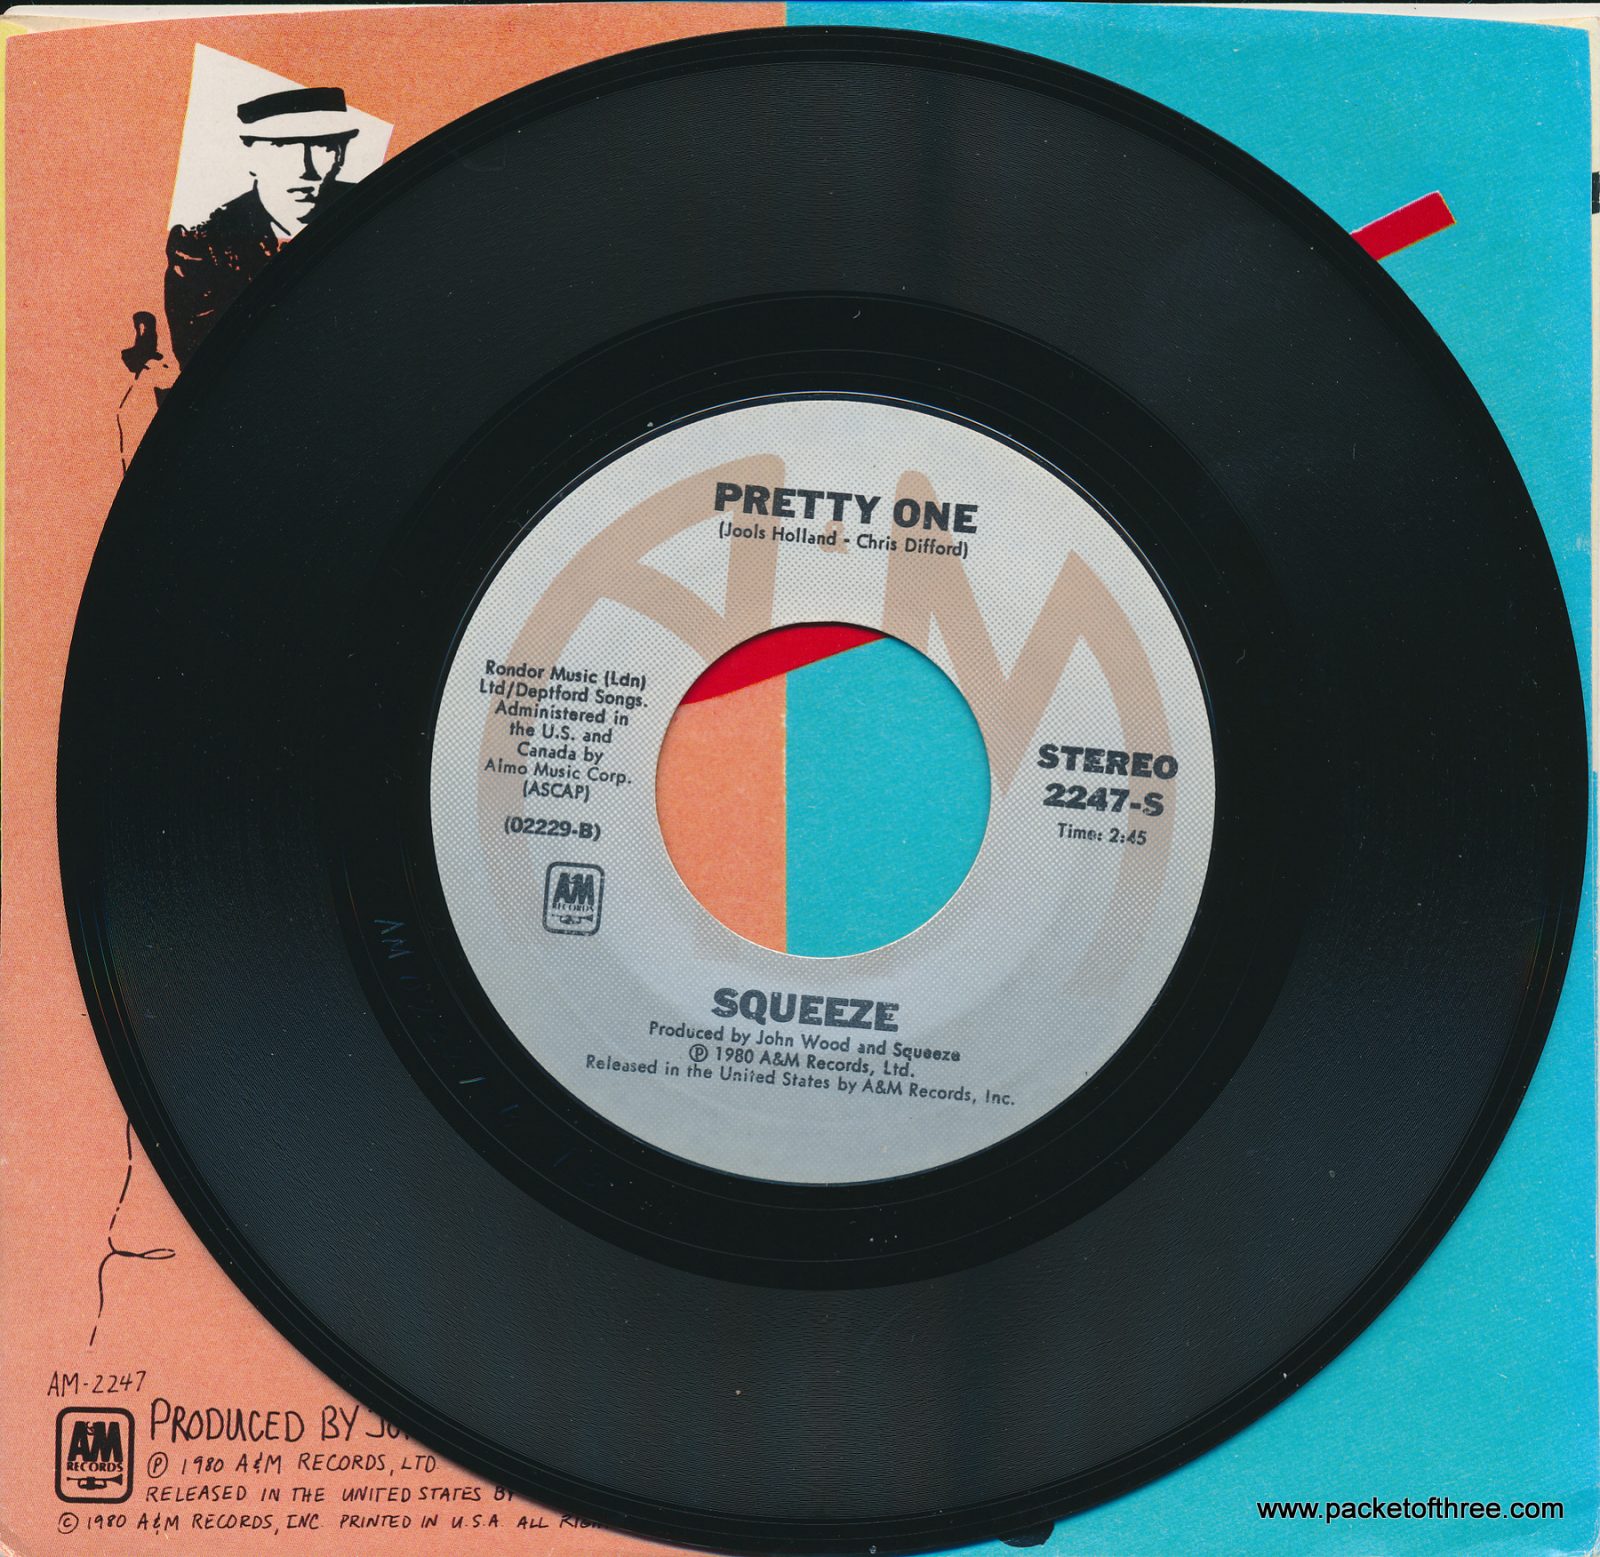 Pulling Mussels (From the Shell) - USA - 7" - picture sleeve